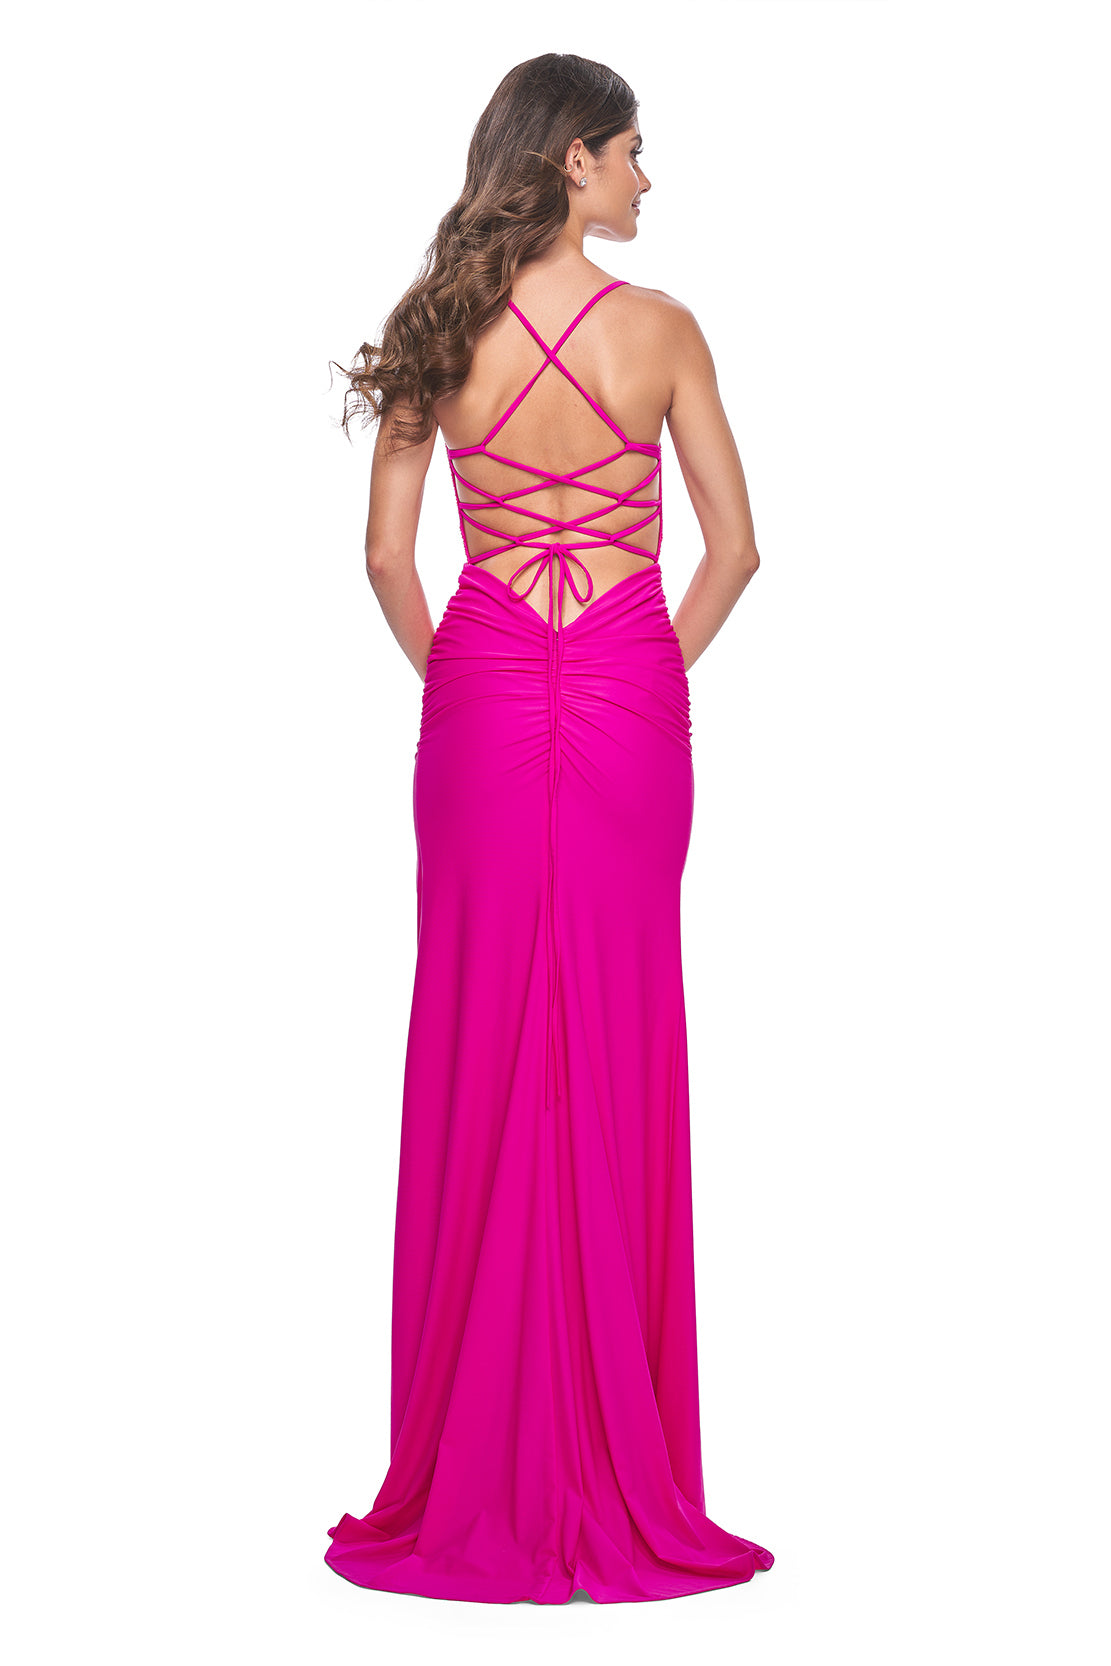 La Femme 31988 Rhinestone Embellished Lace Bodice Prom Gown - A glamorous long dress featuring a ruched jersey skirt, high slit, rhinestone embellished lace bodice with exposed boning, lace-up back, and ruching along the zipper for a perfect fit. The model is wearing the dress in hot fuchsia.